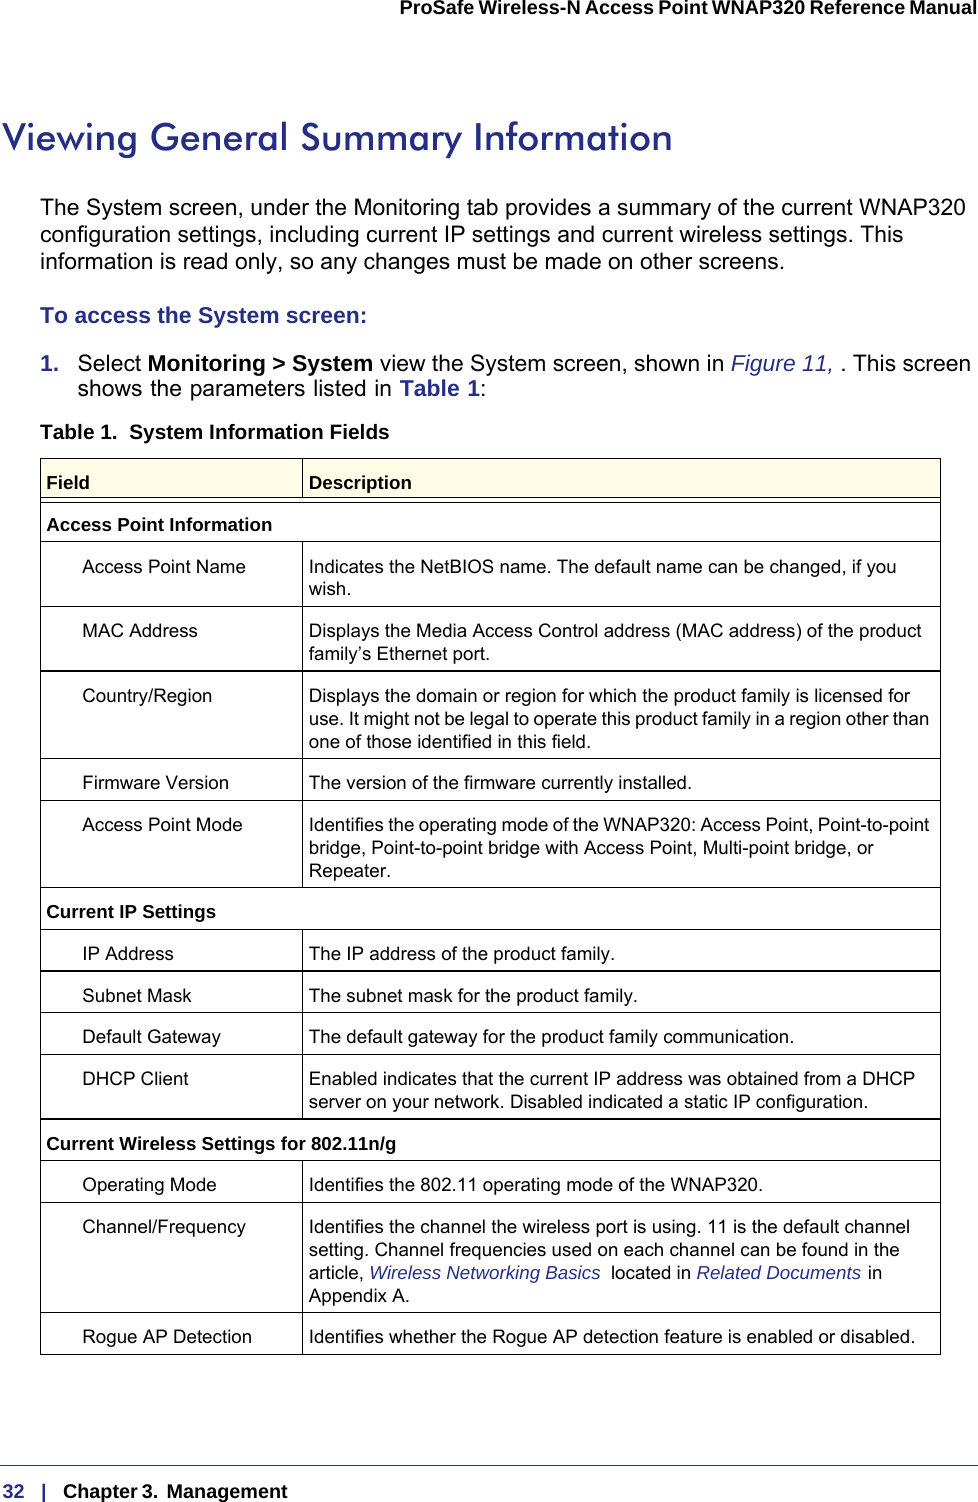 32   |   Chapter 3.  Management  ProSafe Wireless-N Access Point WNAP320 Reference Manual Viewing General Summary InformationThe System screen, under the Monitoring tab provides a summary of the current WNAP320 configuration settings, including current IP settings and current wireless settings. This information is read only, so any changes must be made on other screens.To access the System screen:1.  Select Monitoring &gt; System view the System screen, shown in Figure  11, . This screen shows the parameters listed in Table 1:Table 1.  System Information Fields Field  DescriptionAccess Point InformationAccess Point Name  Indicates the NetBIOS name. The default name can be changed, if you wish.MAC Address Displays the Media Access Control address (MAC address) of the product family’s Ethernet port.Country/Region Displays the domain or region for which the product family is licensed for use. It might not be legal to operate this product family in a region other than one of those identified in this field.Firmware Version The version of the firmware currently installed.Access Point Mode Identifies the operating mode of the WNAP320: Access Point, Point-to-point bridge, Point-to-point bridge with Access Point, Multi-point bridge, or Repeater.Current IP SettingsIP Address The IP address of the product family.Subnet Mask The subnet mask for the product family.Default Gateway The default gateway for the product family communication.DHCP Client Enabled indicates that the current IP address was obtained from a DHCP server on your network. Disabled indicated a static IP configuration.Current Wireless Settings for 802.11n/gOperating Mode Identifies the 802.11 operating mode of the WNAP320.Channel/Frequency Identifies the channel the wireless port is using. 11 is the default channel setting. Channel frequencies used on each channel can be found in the article, Wireless Networking Basics  located in Related Documents   in Appendix  A.Rogue AP Detection Identifies whether the Rogue AP detection feature is enabled or disabled.